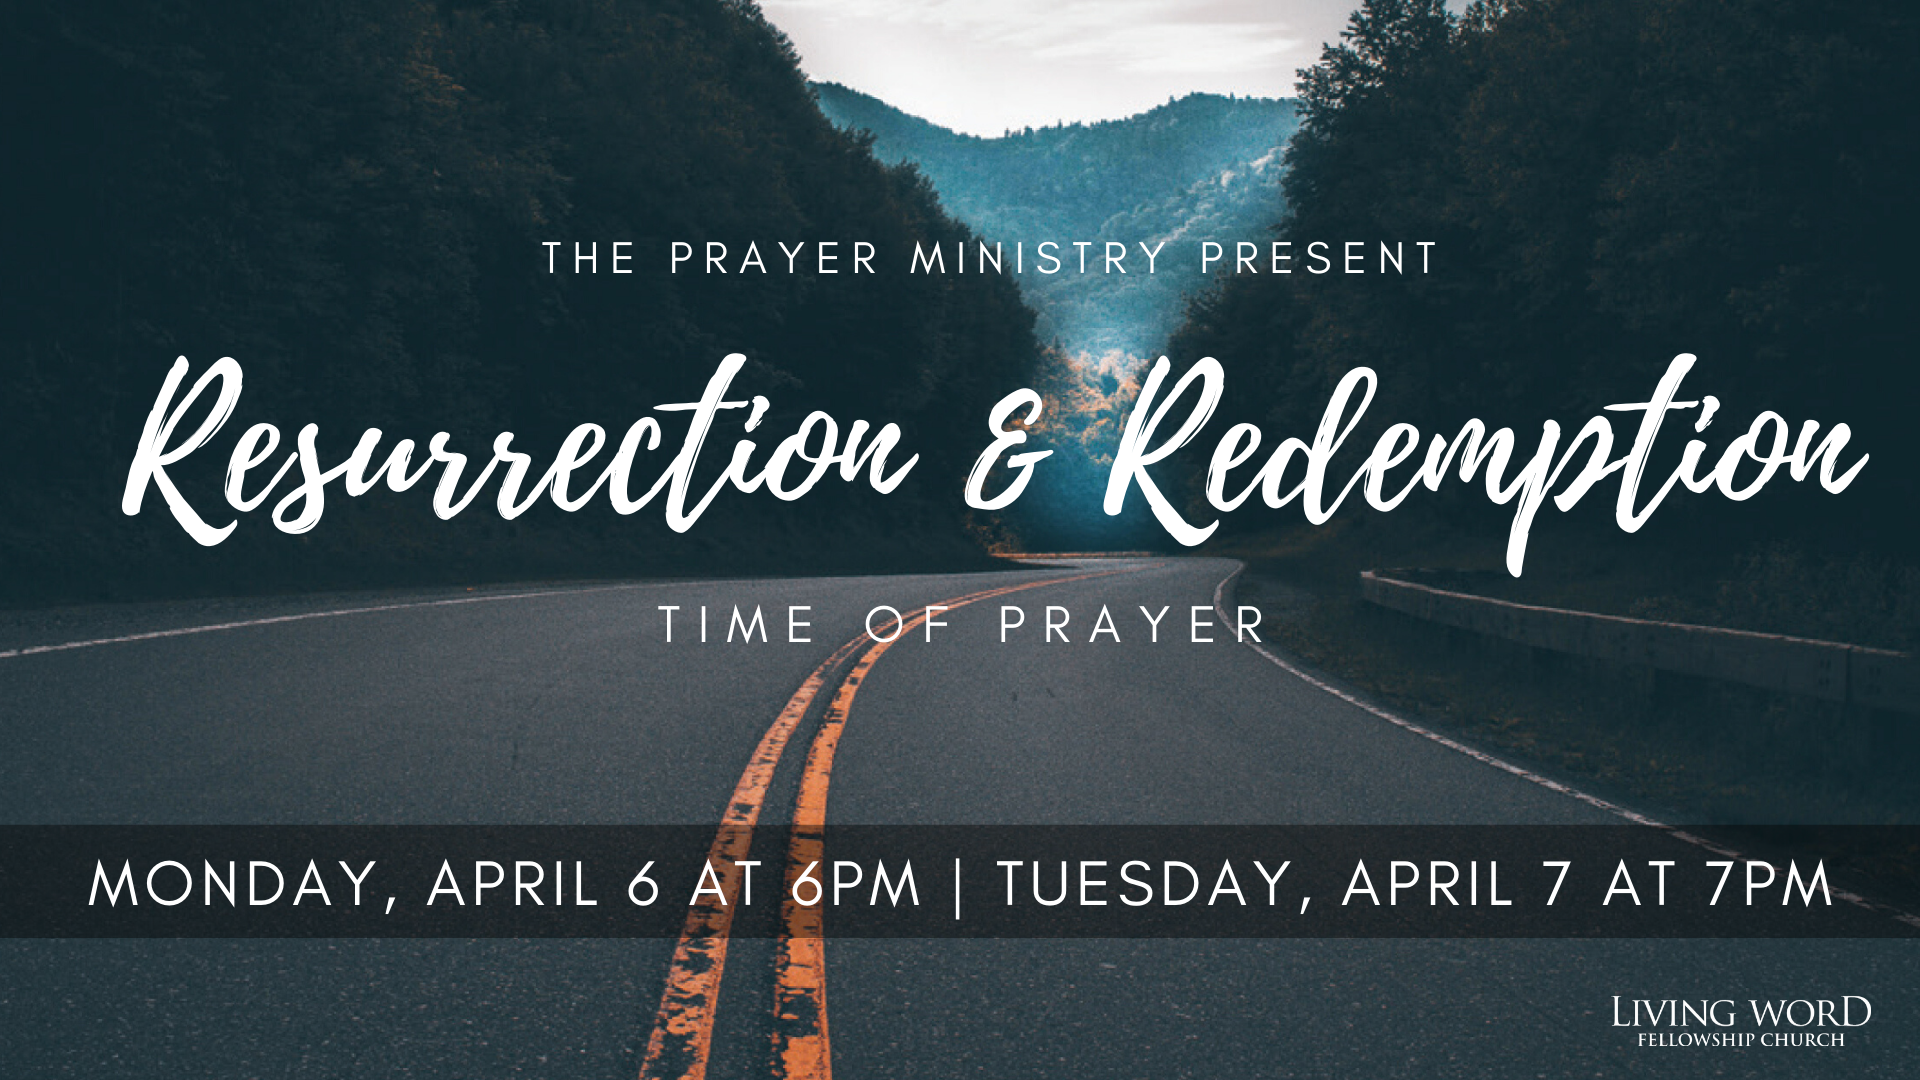 The Road to Resurrection and Redemption Time of Prayer head image